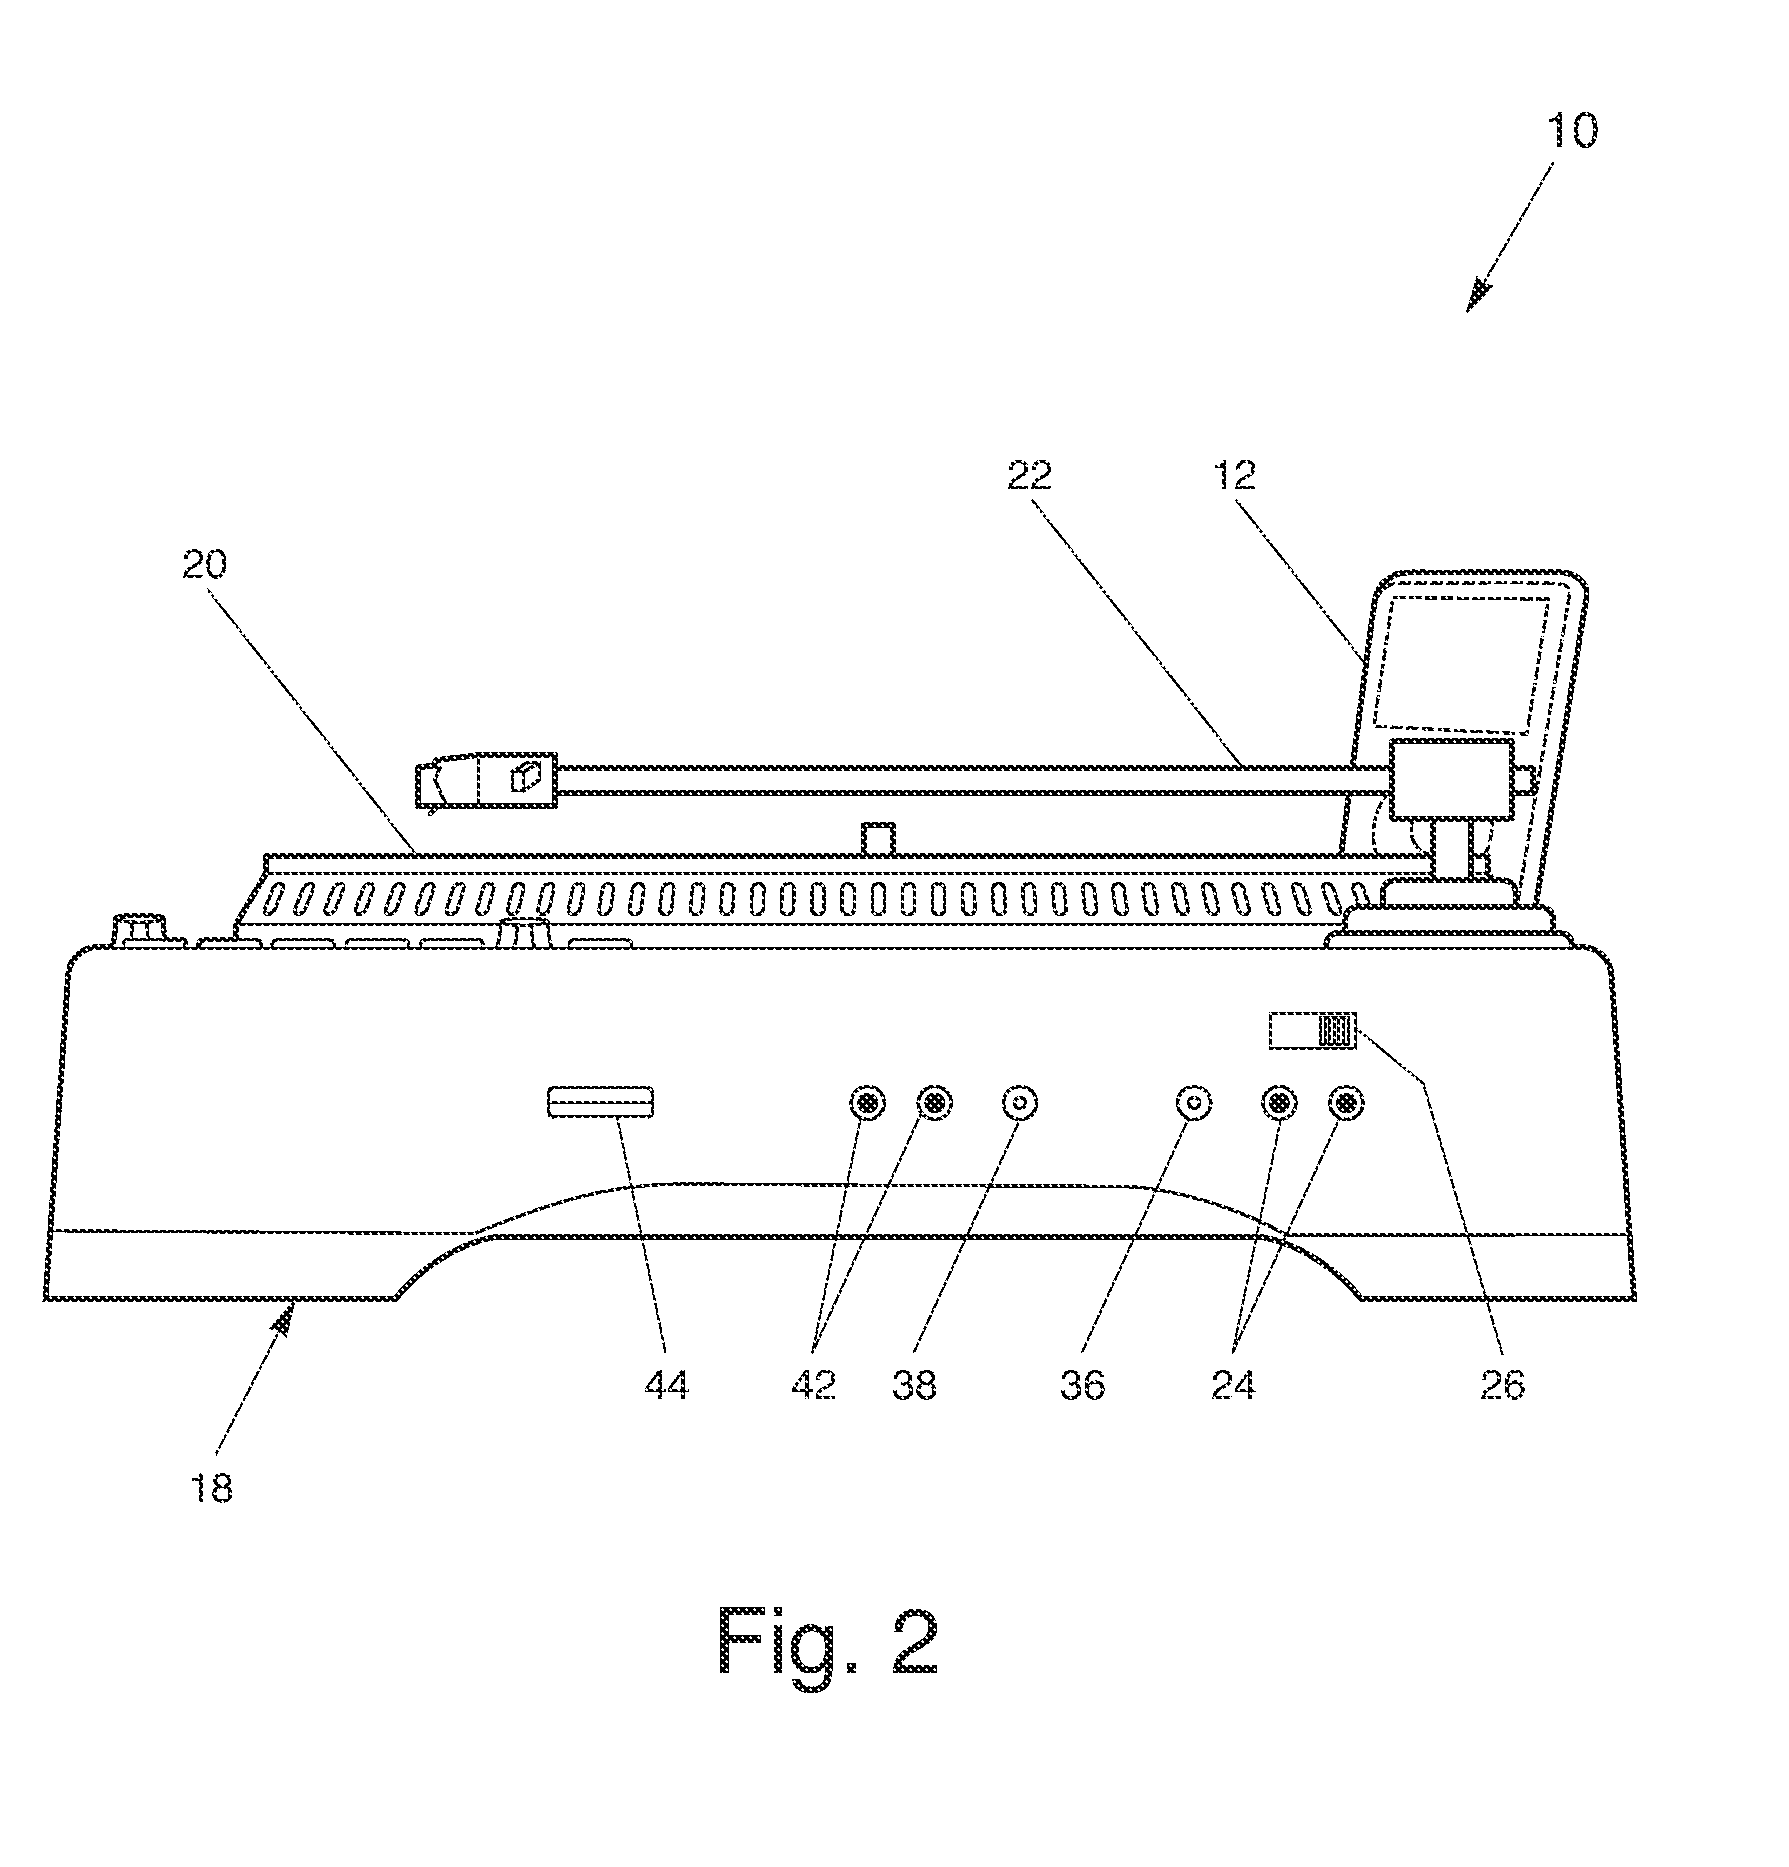 Vinyl record turntable having integrated docking station for a portable media player